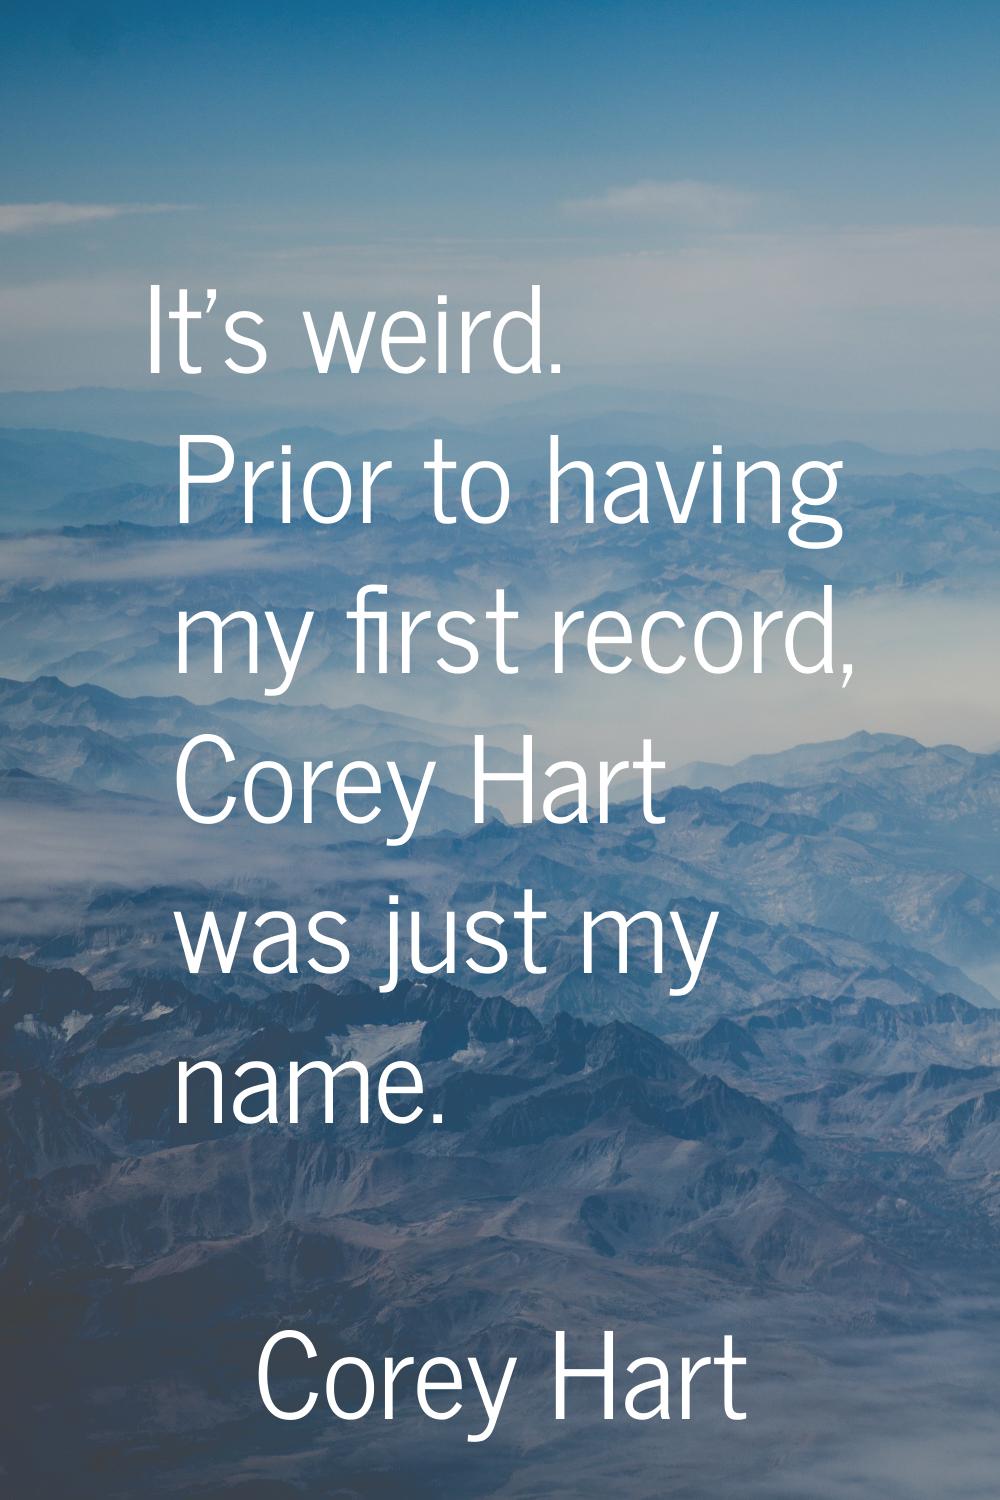 It's weird. Prior to having my first record, Corey Hart was just my name.